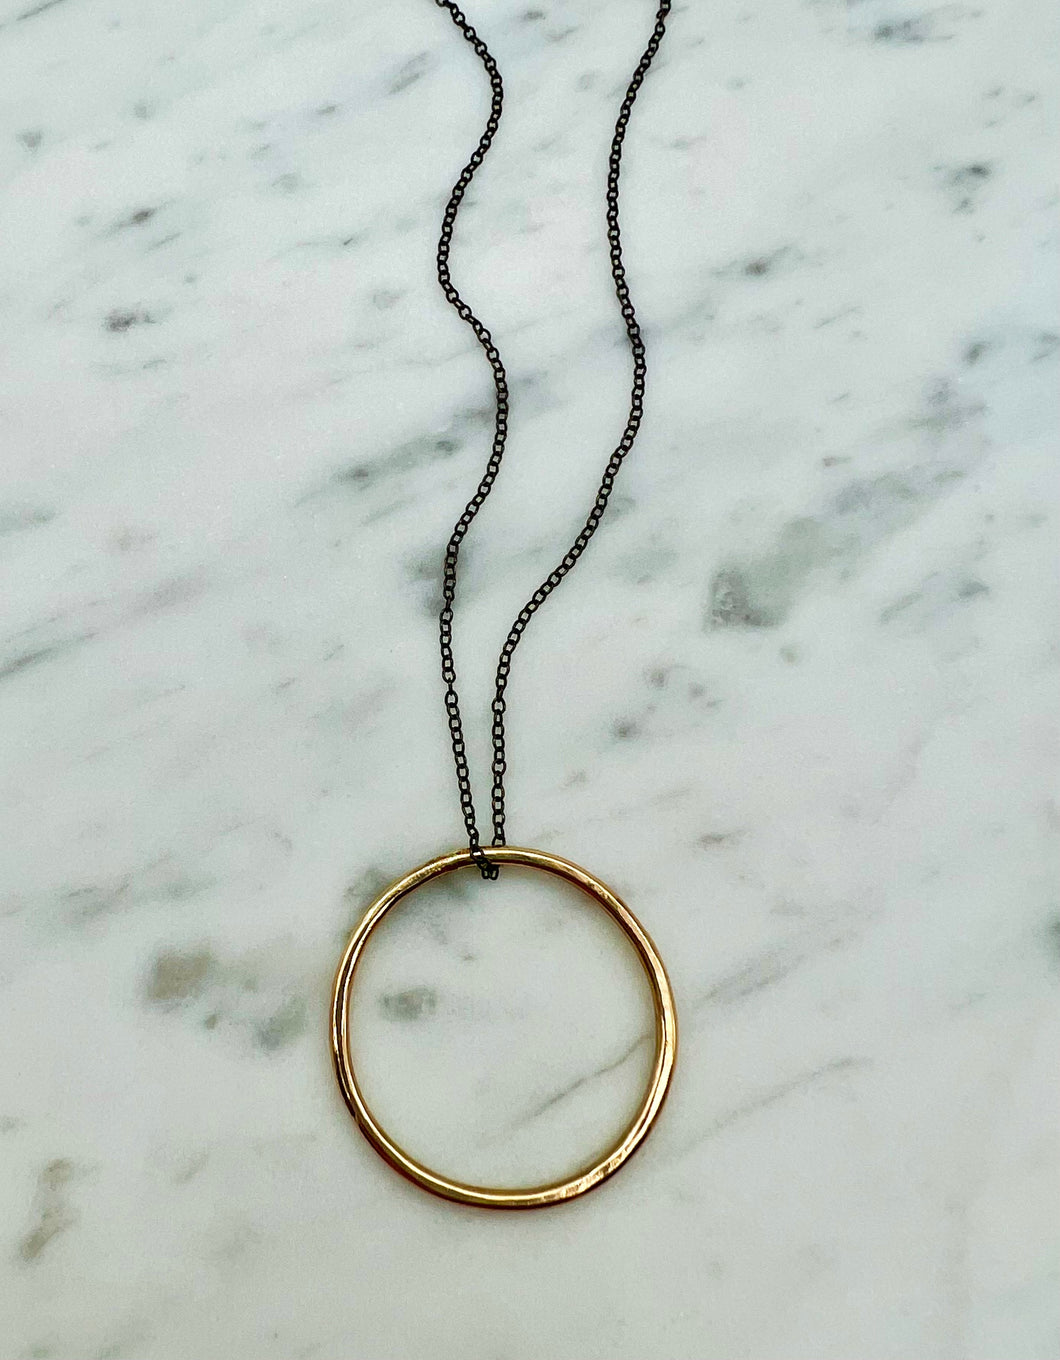 Large Gold Circle Pendant on Black Silver Necklace